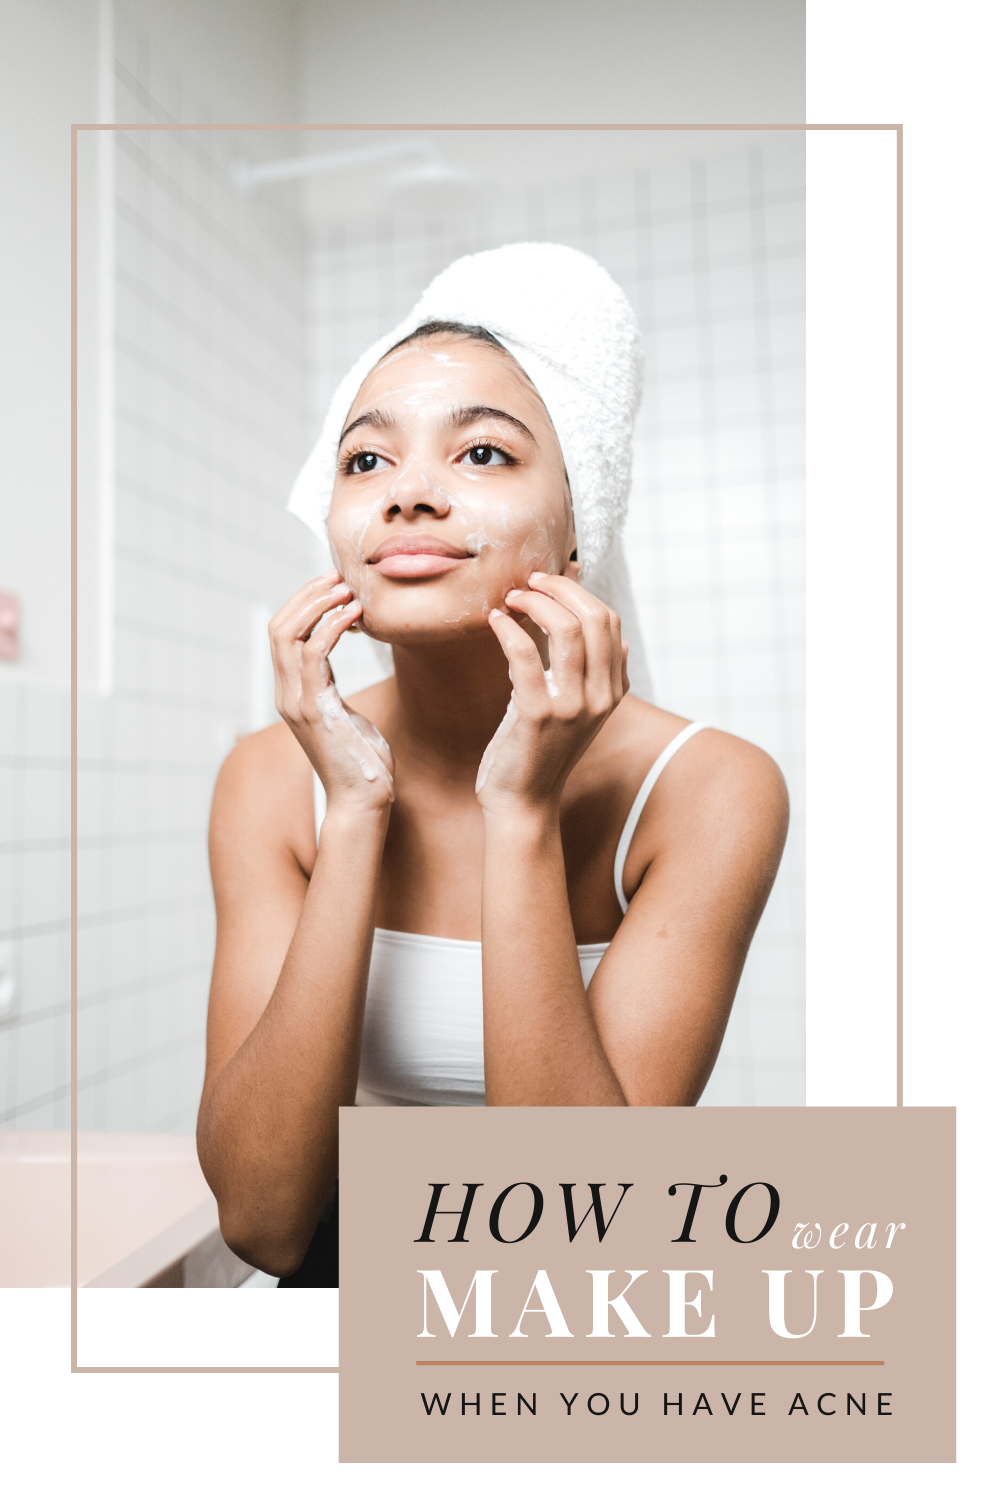 Girl puts on skin care products and looks in mirror. She has a towel on her head. This article covers how to wear make up when you have acne.